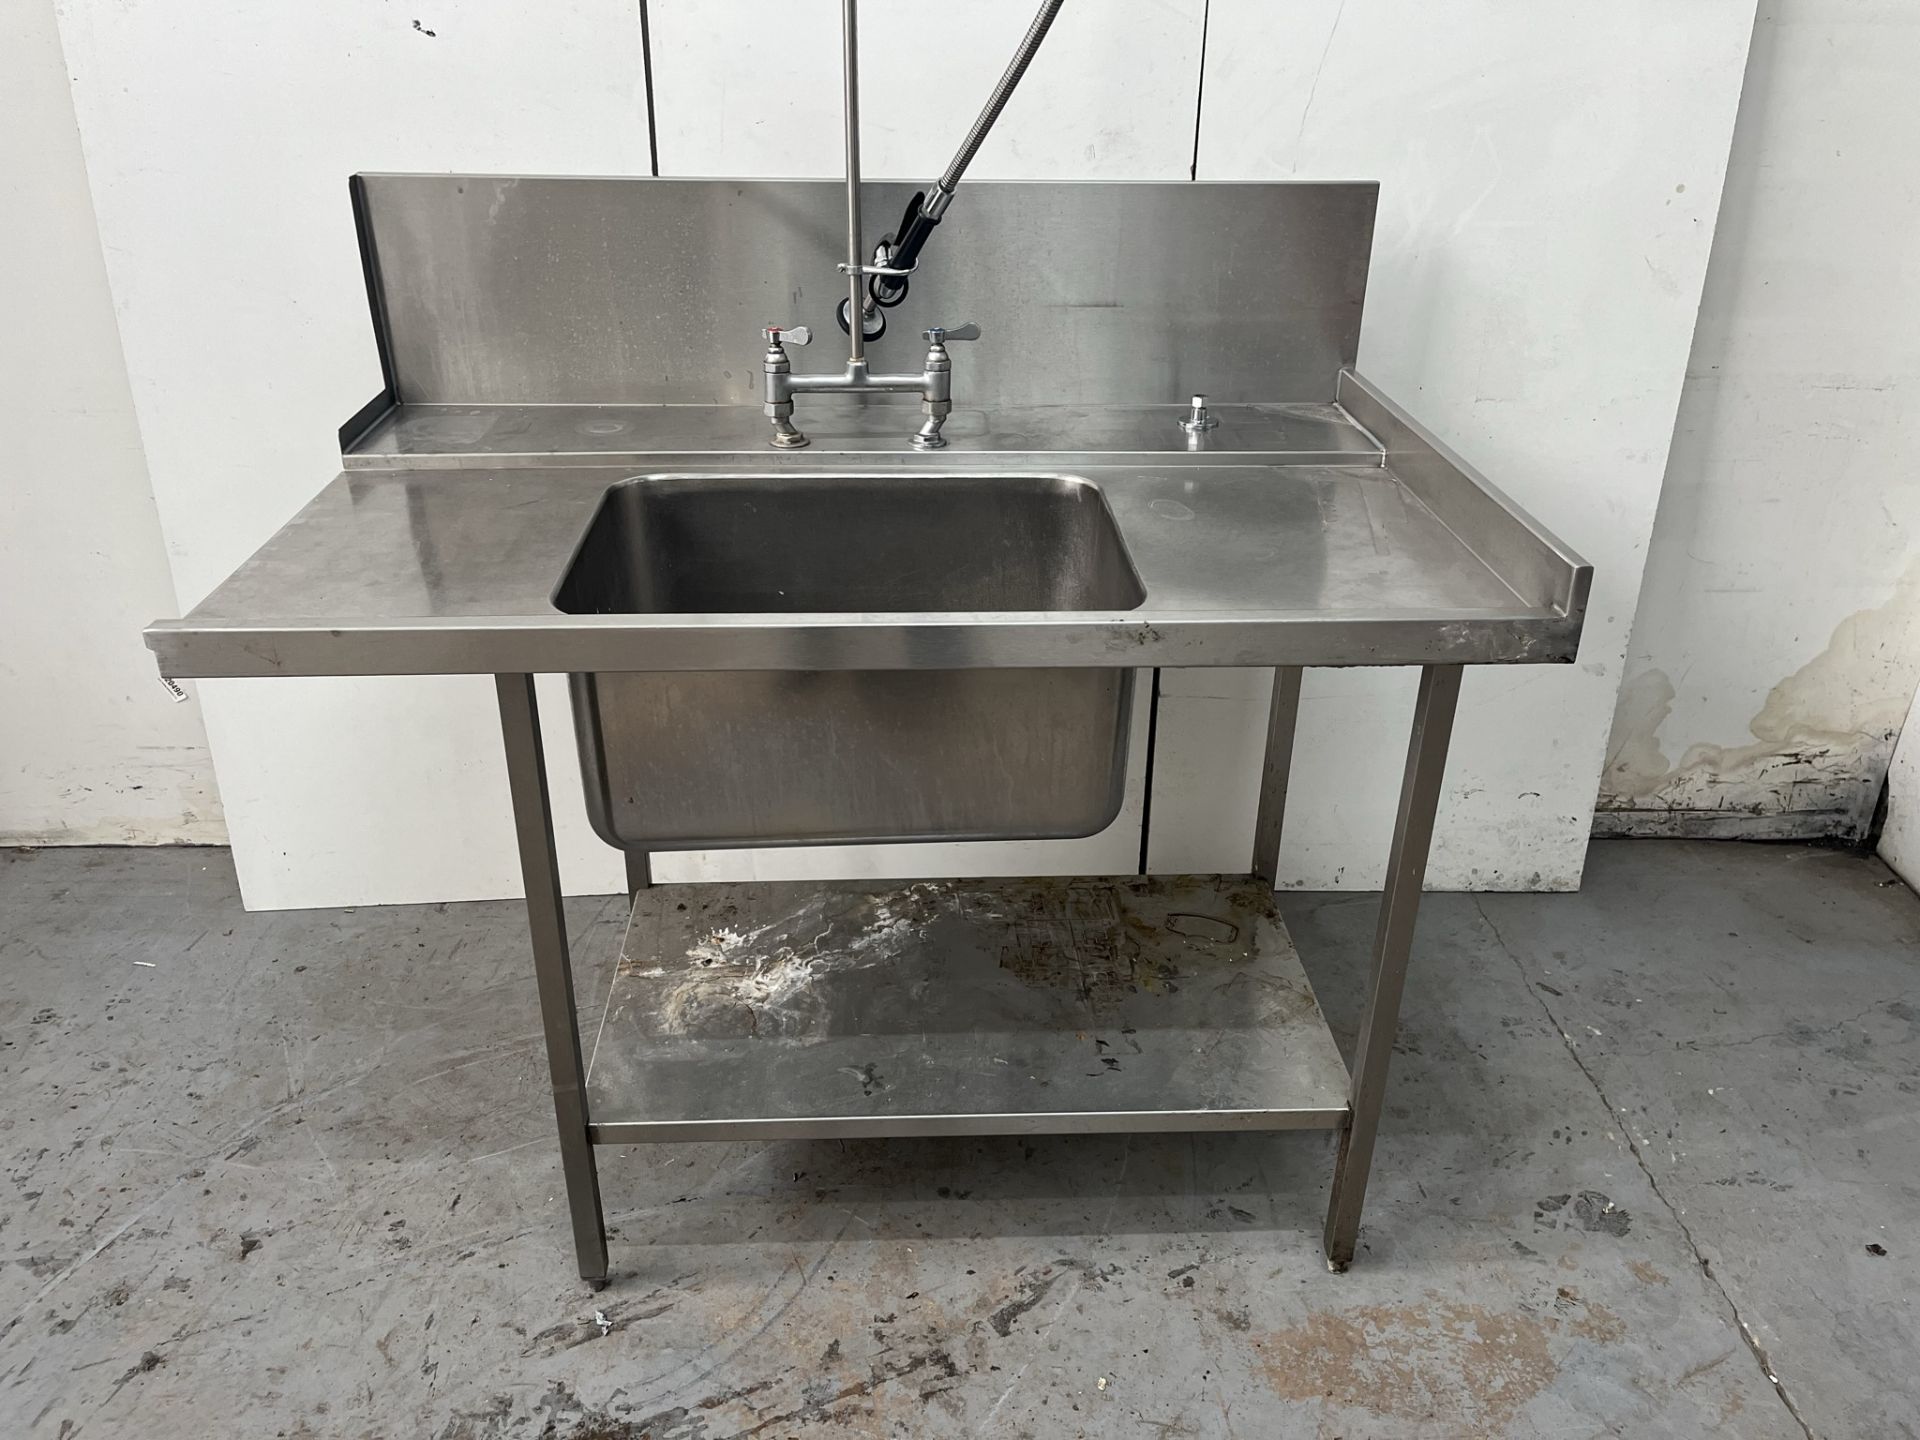 Commercial Stainless Steel Catering Table With Pre Rinse Tap & Sink - Image 23 of 24